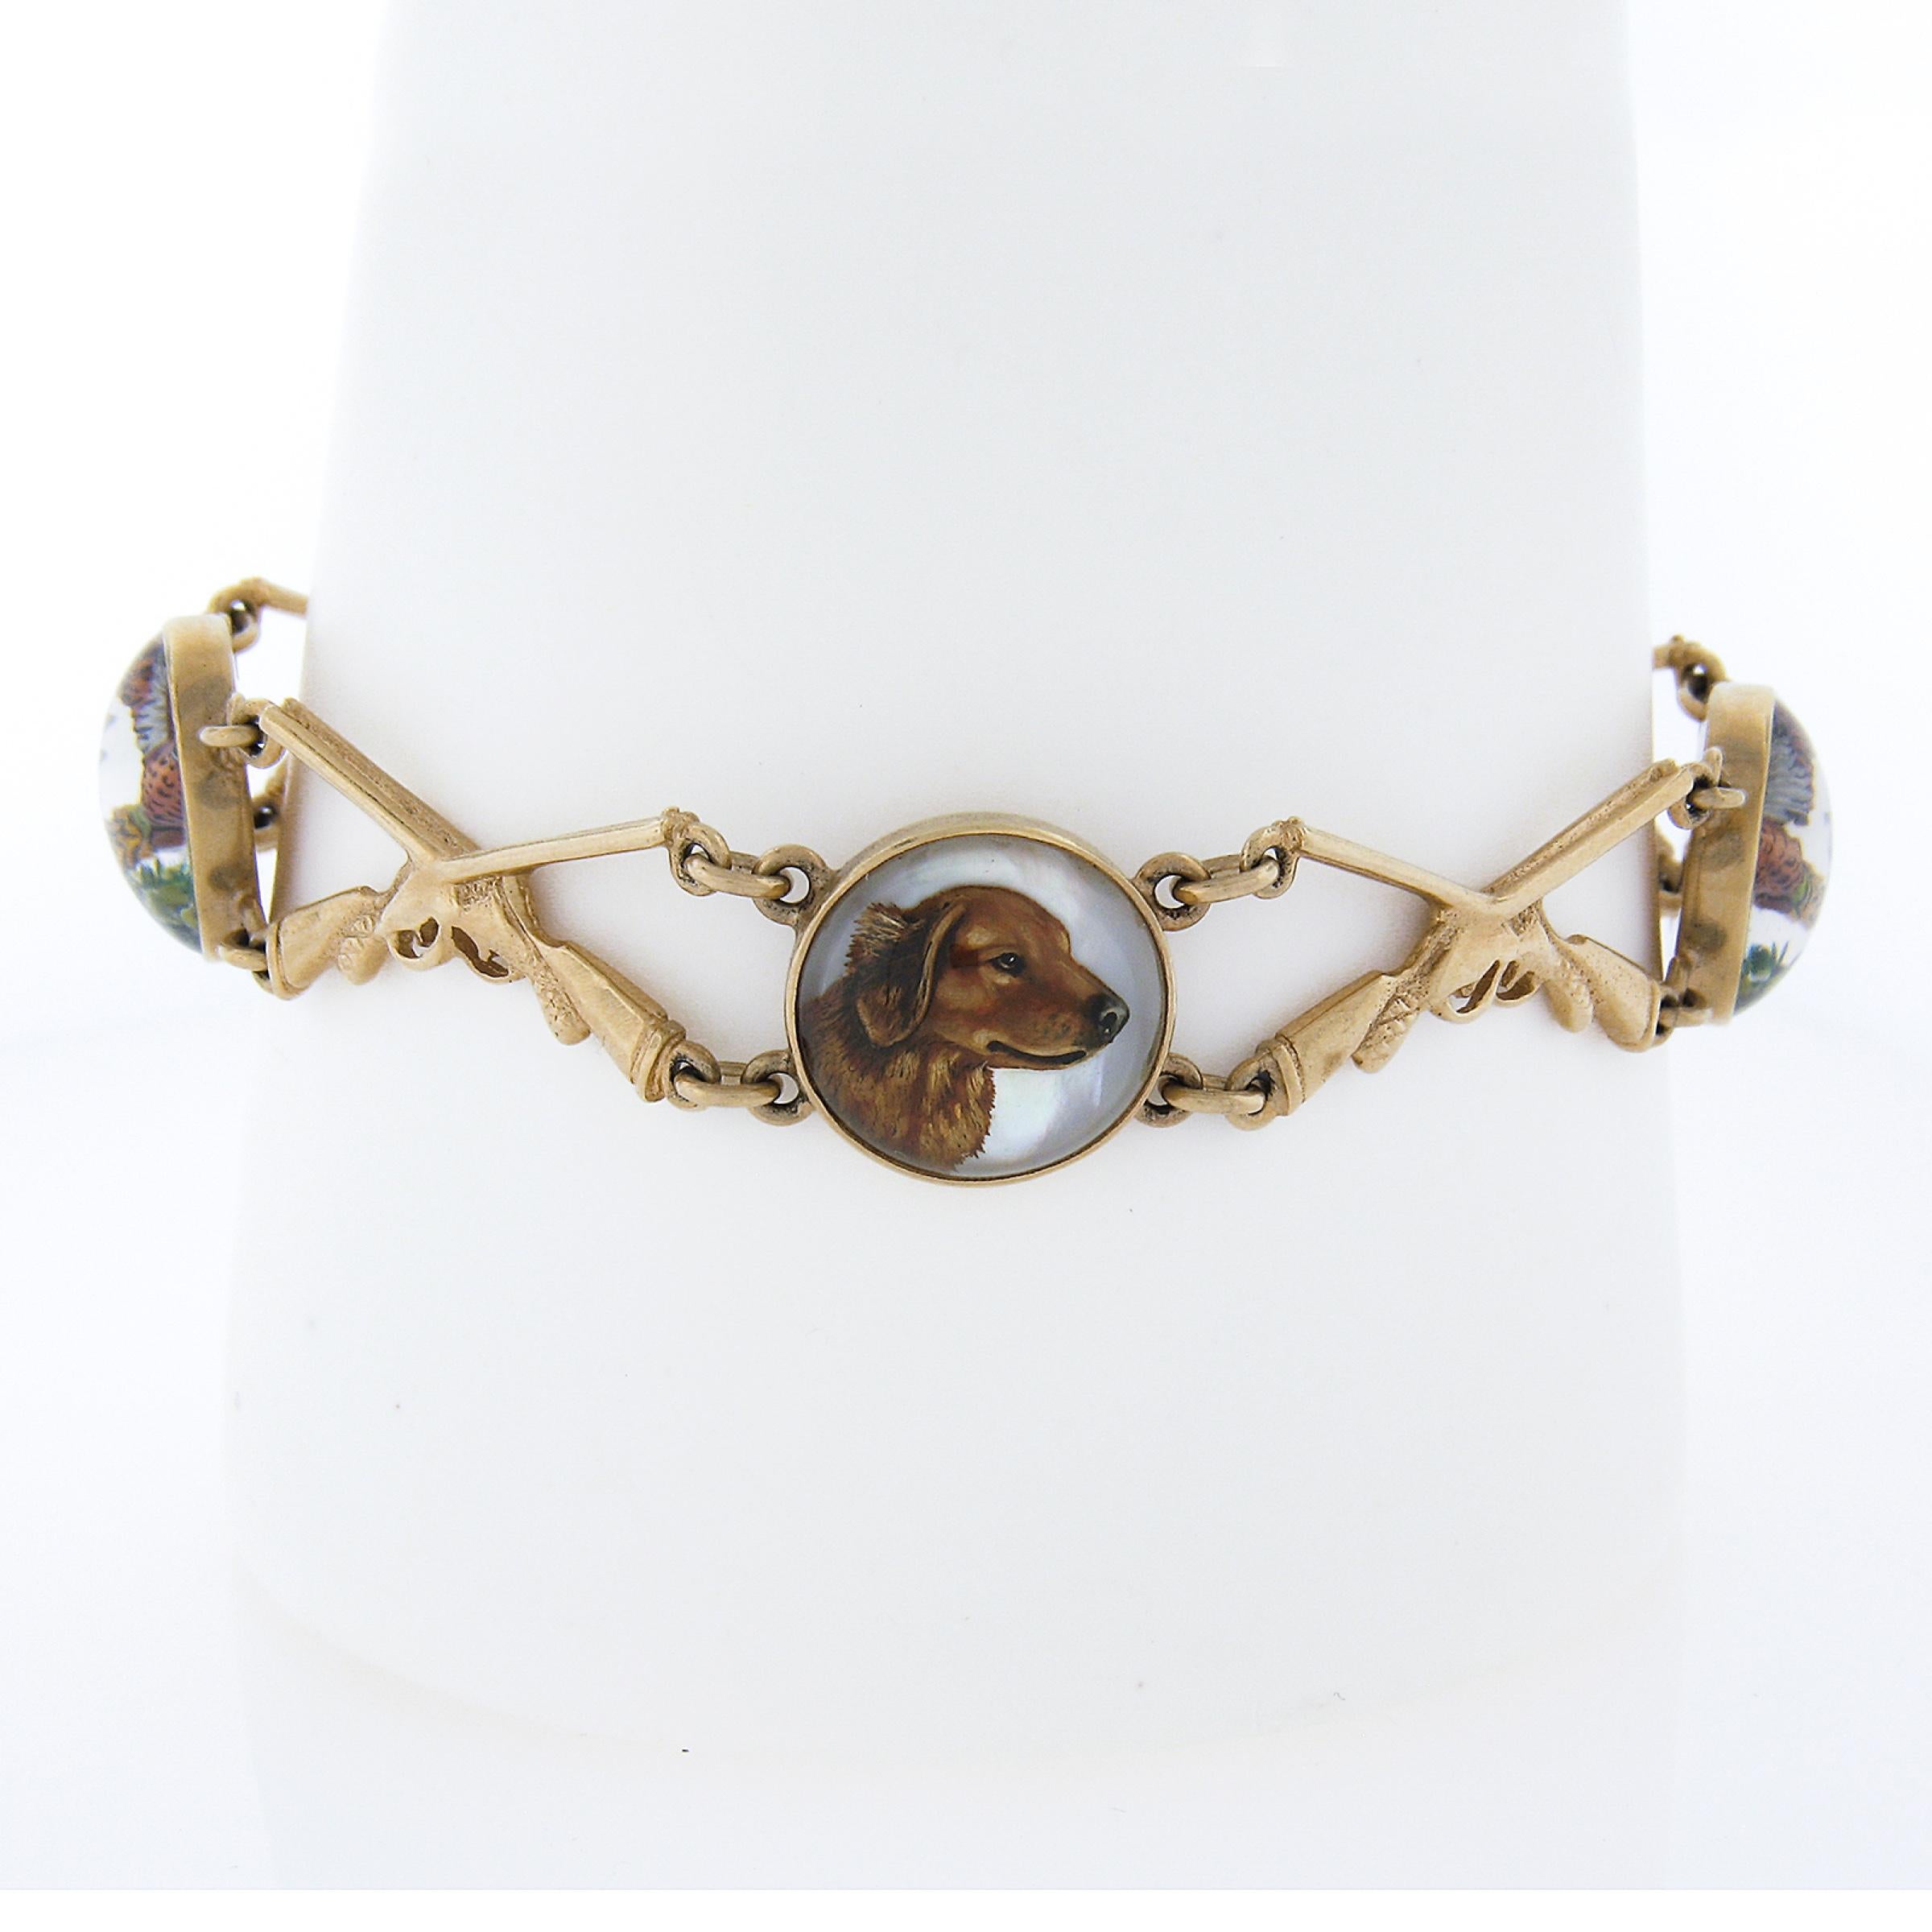 This gorgeous vintage hunting bracelet features portraits of a hunting dog and flying pheasants, attached to hunting rifles throughout the design. The bracelet is highly collectible and would make a great add to your style while you're on this